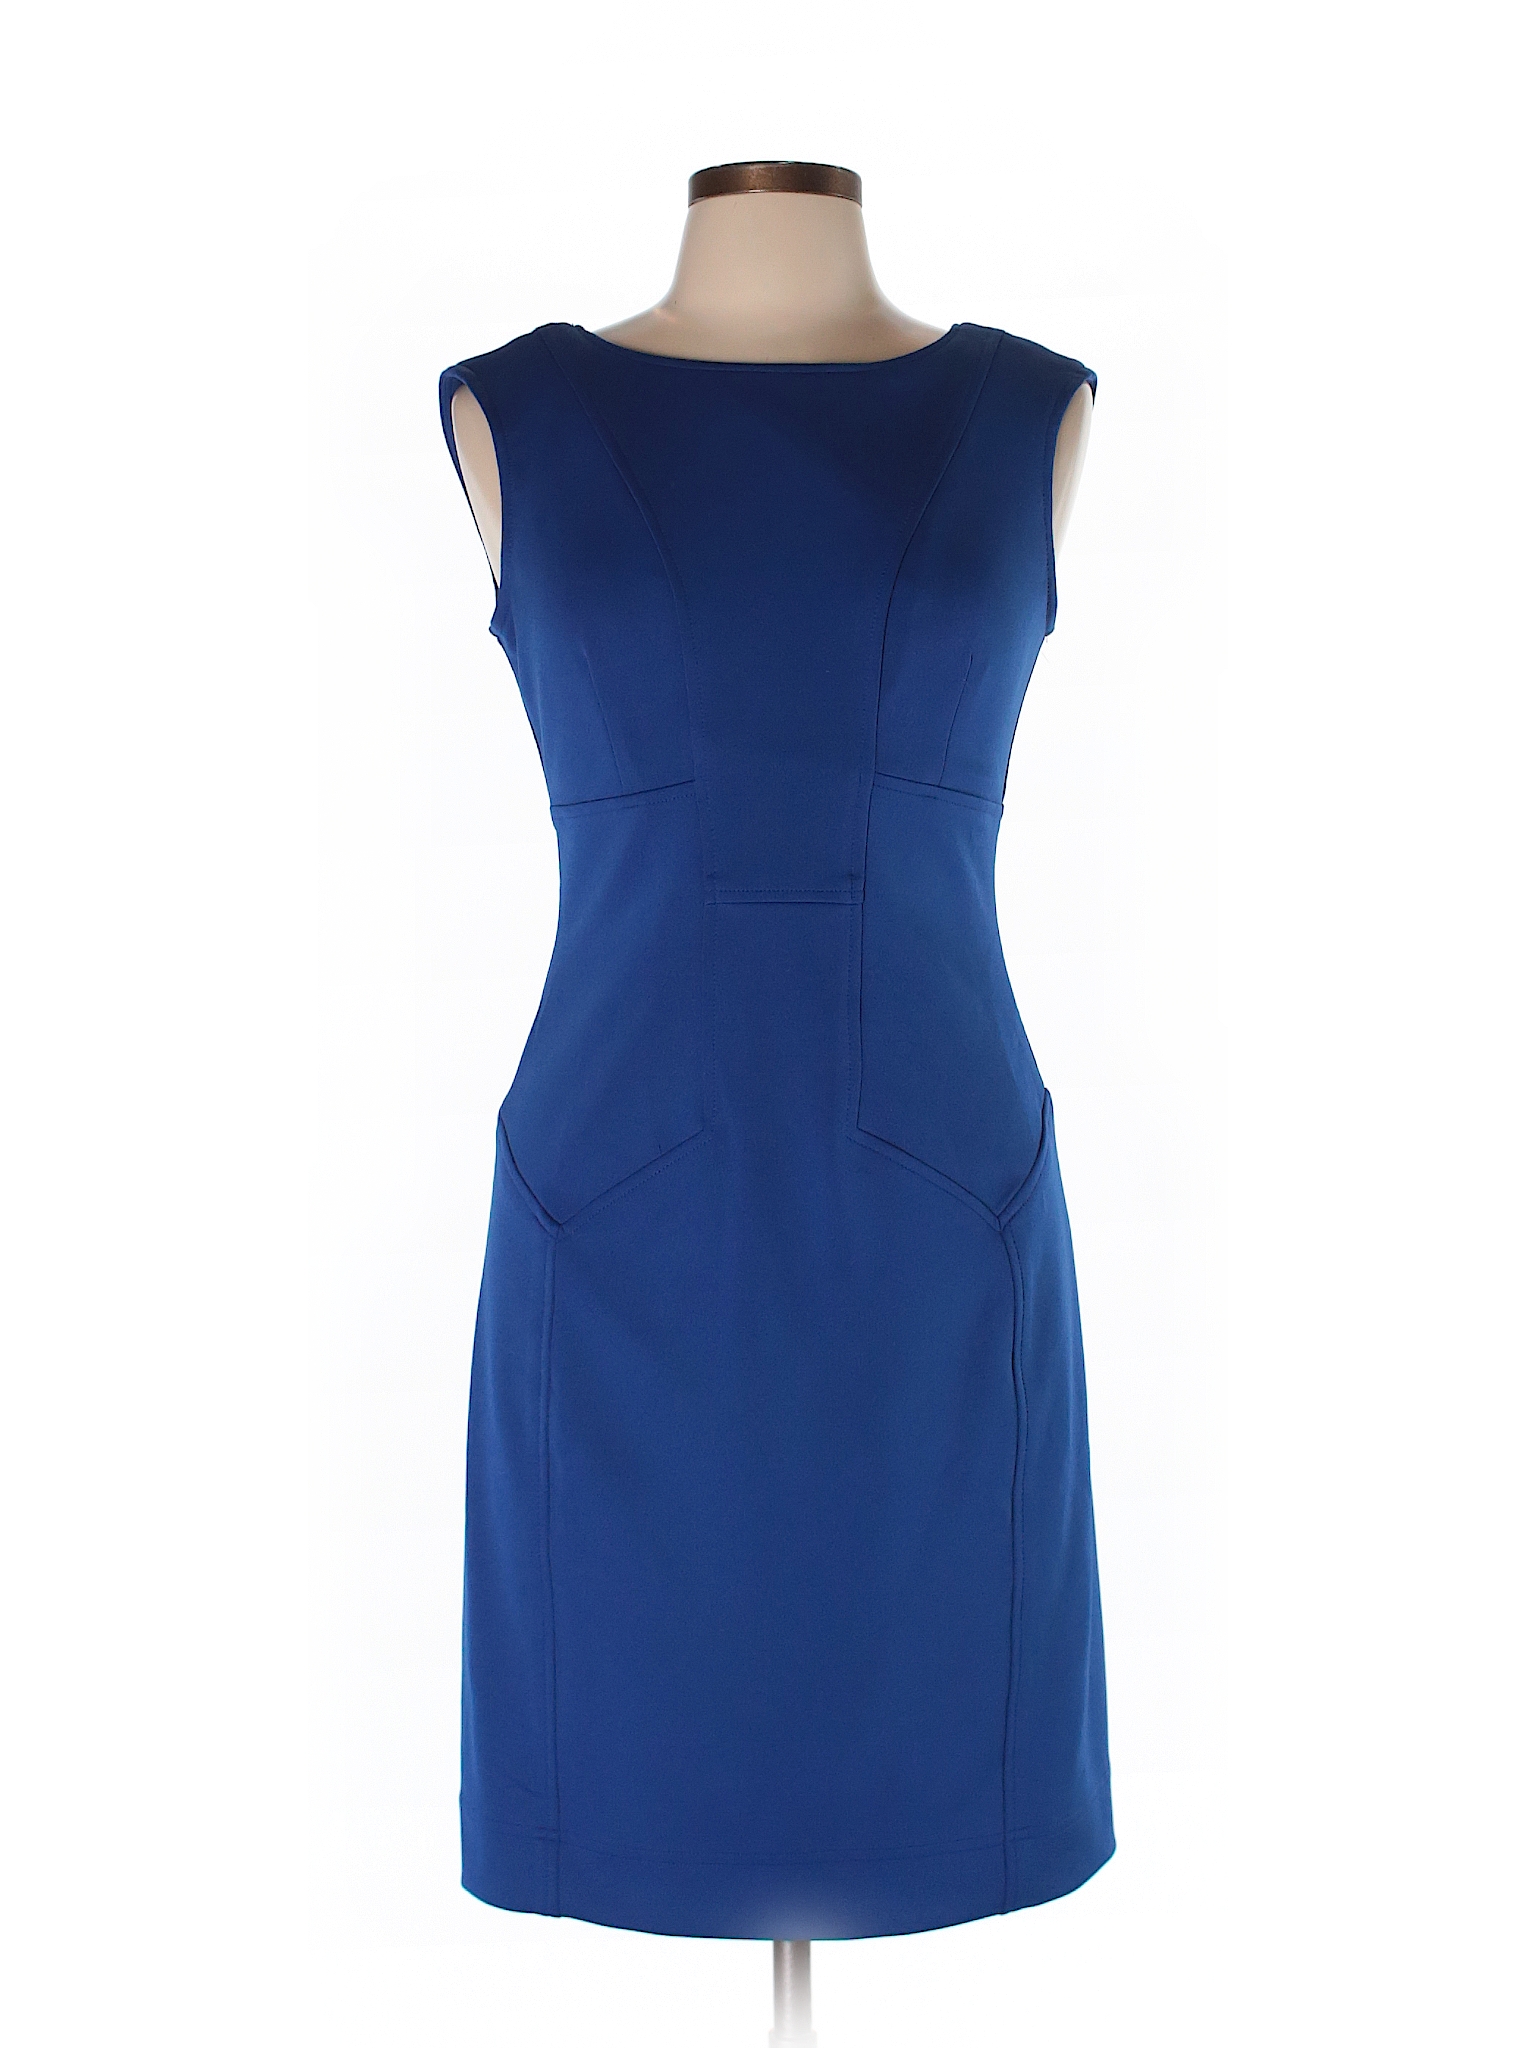 Maggy London Solid Blue Cocktail Dress Size 10 - 76% off | thredUP